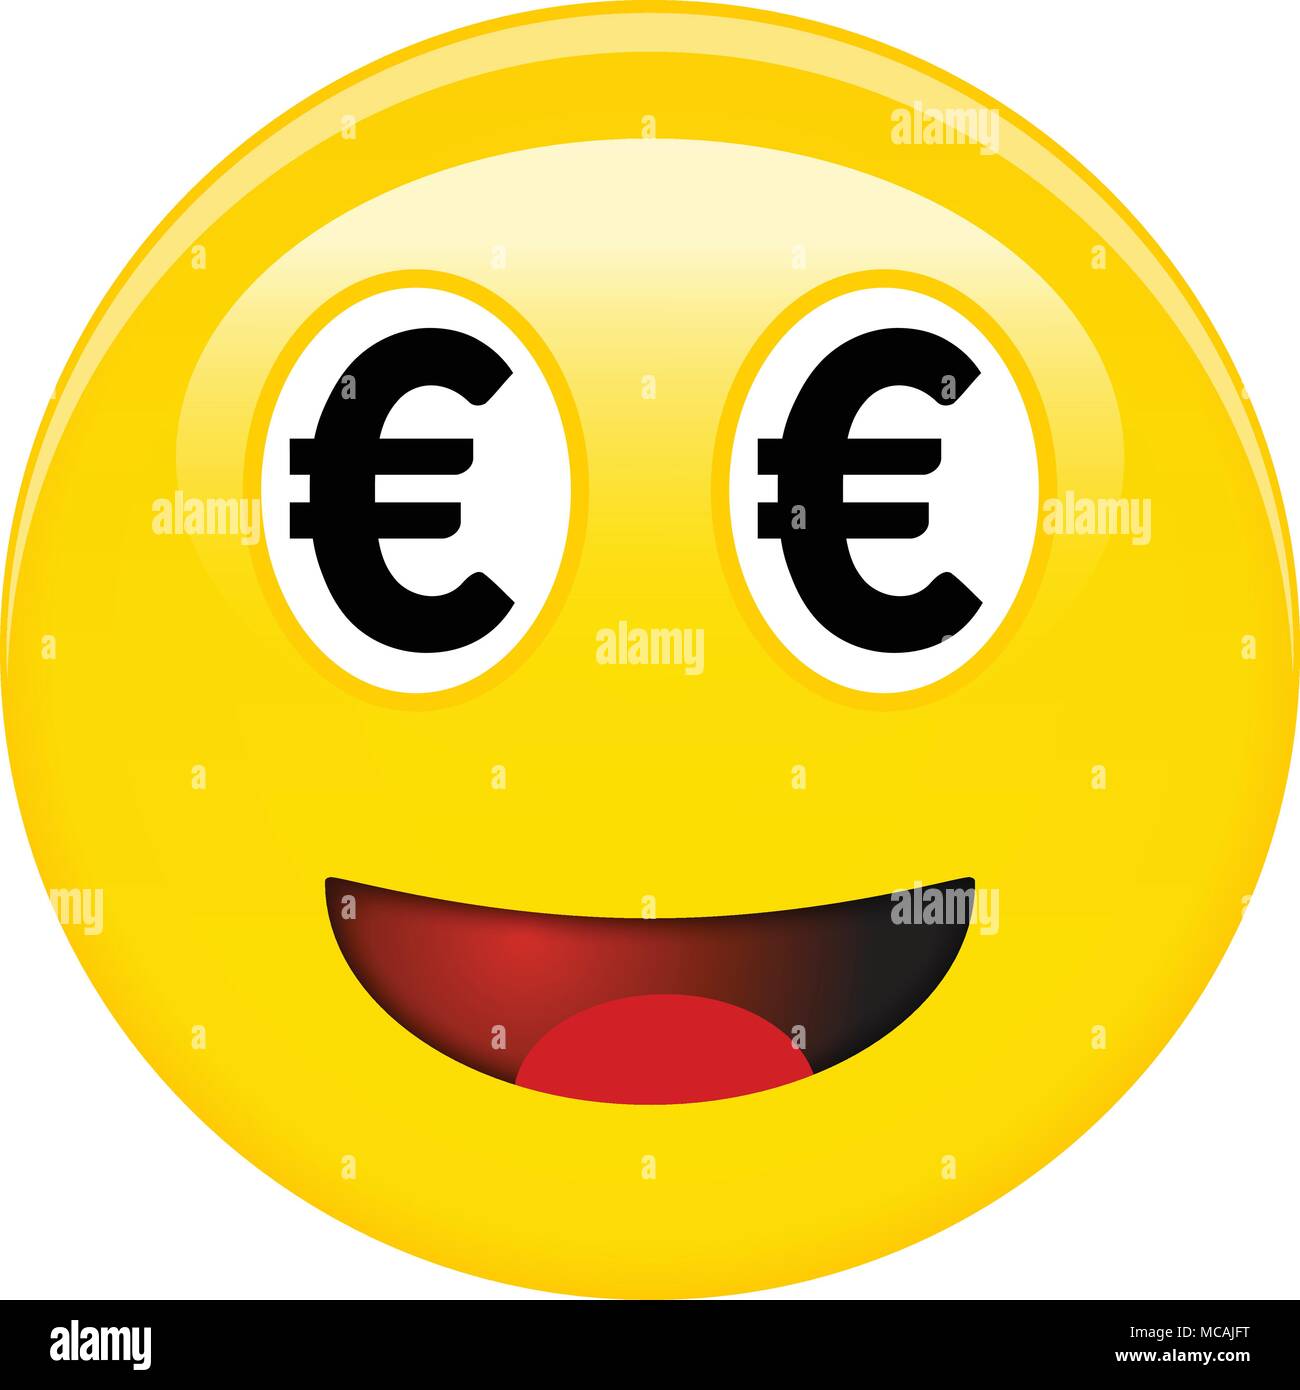 Euro smiley emoticon. Yellow laughing 3d emoji with black eur symbols in place of eyes and red opened mouth. Stock Vector